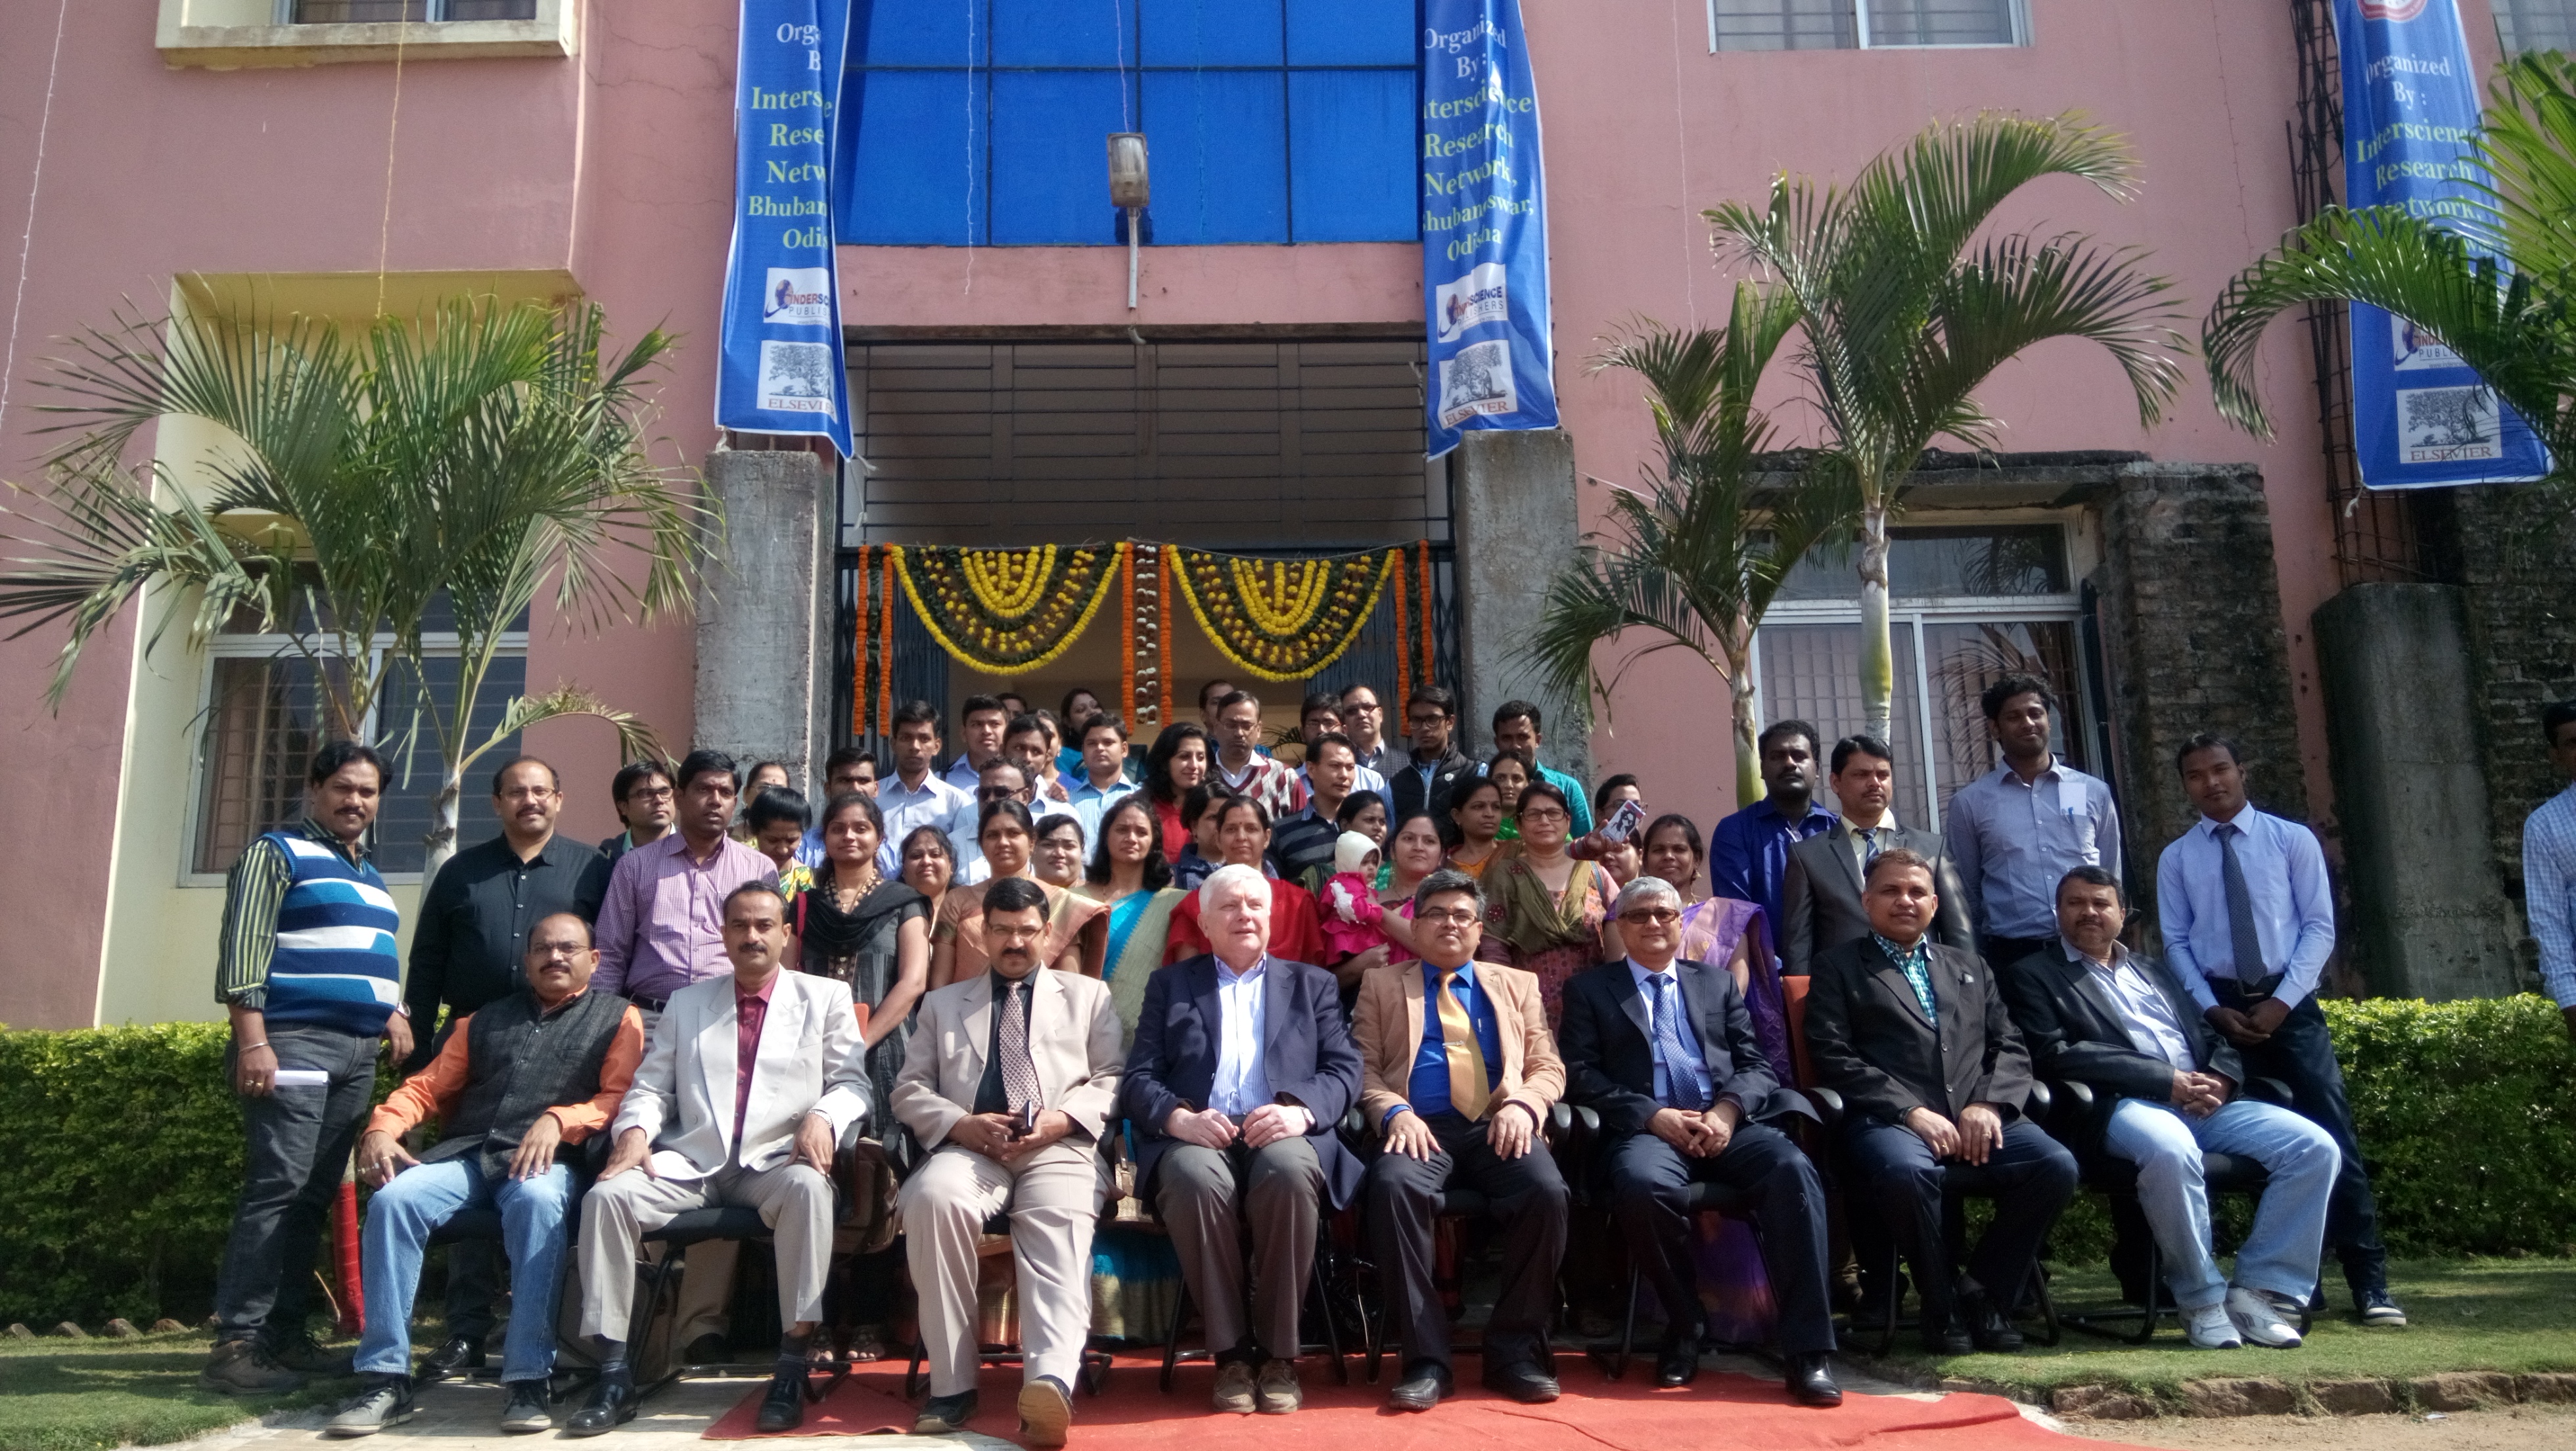 Interscience Institute of Management and Technology, Bhubaneswar Image